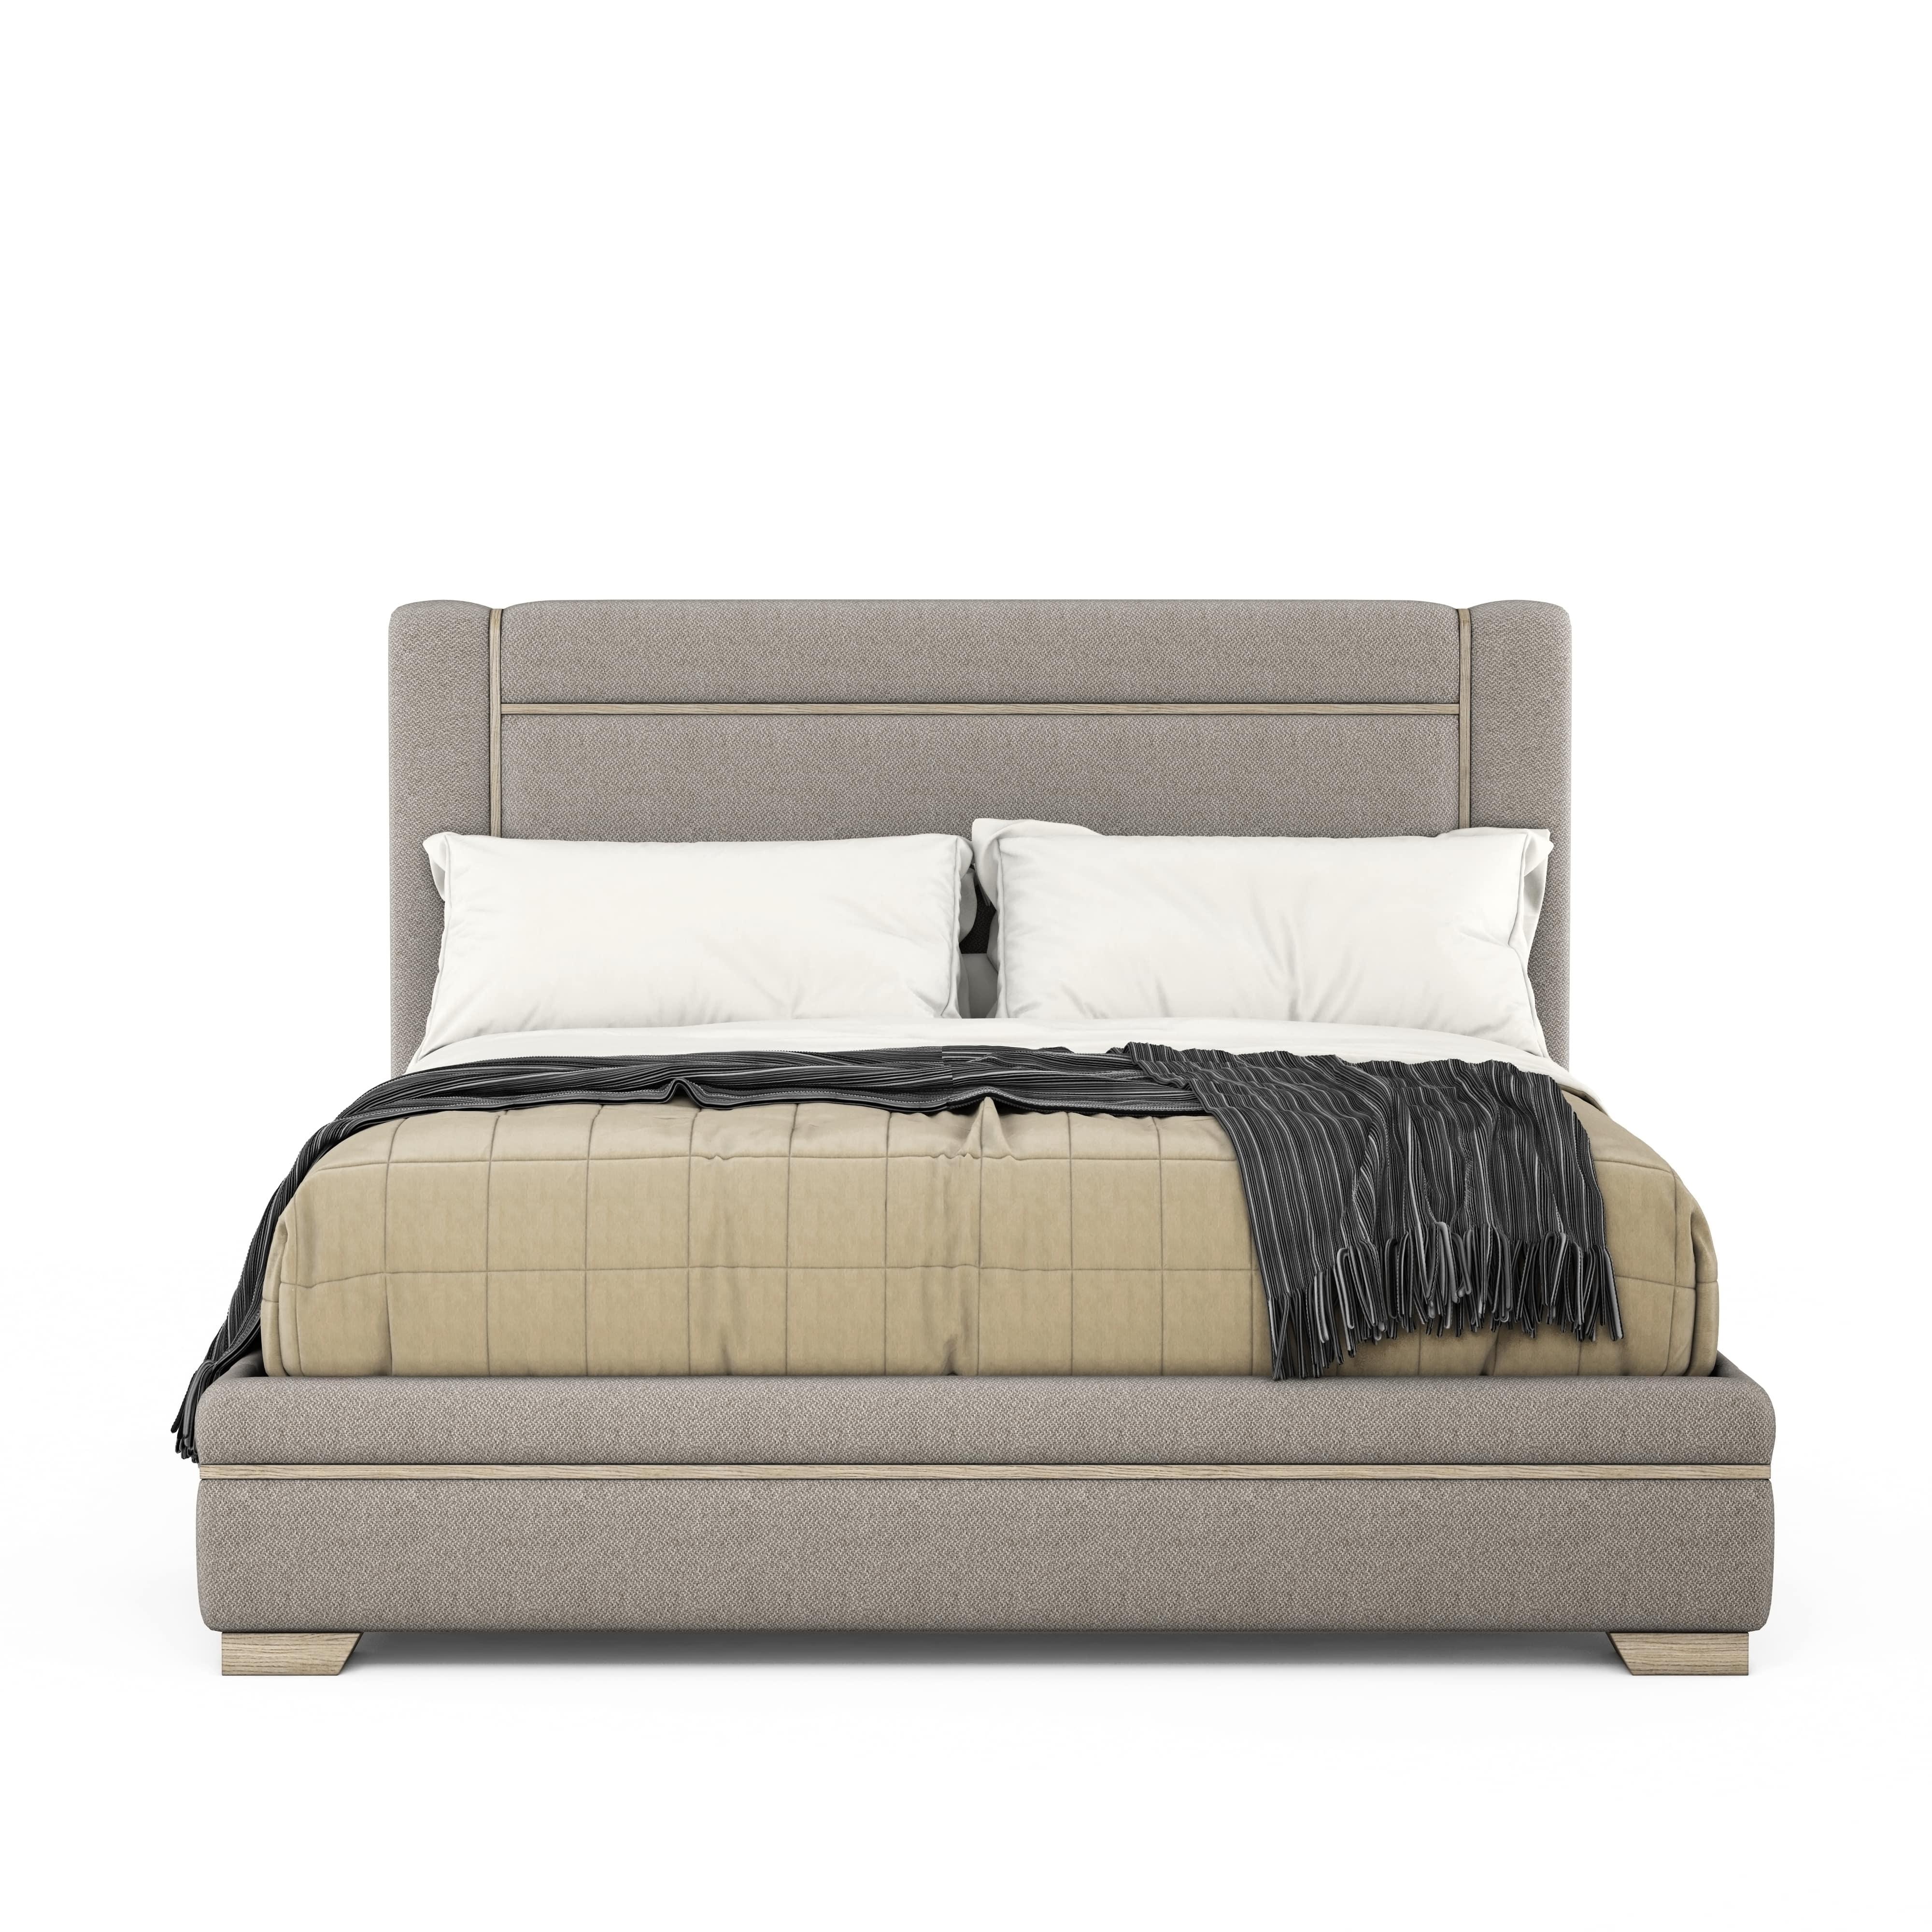 Modern, Transitional Platform Bed North Side 269127-2556 in Light Gray Fabric